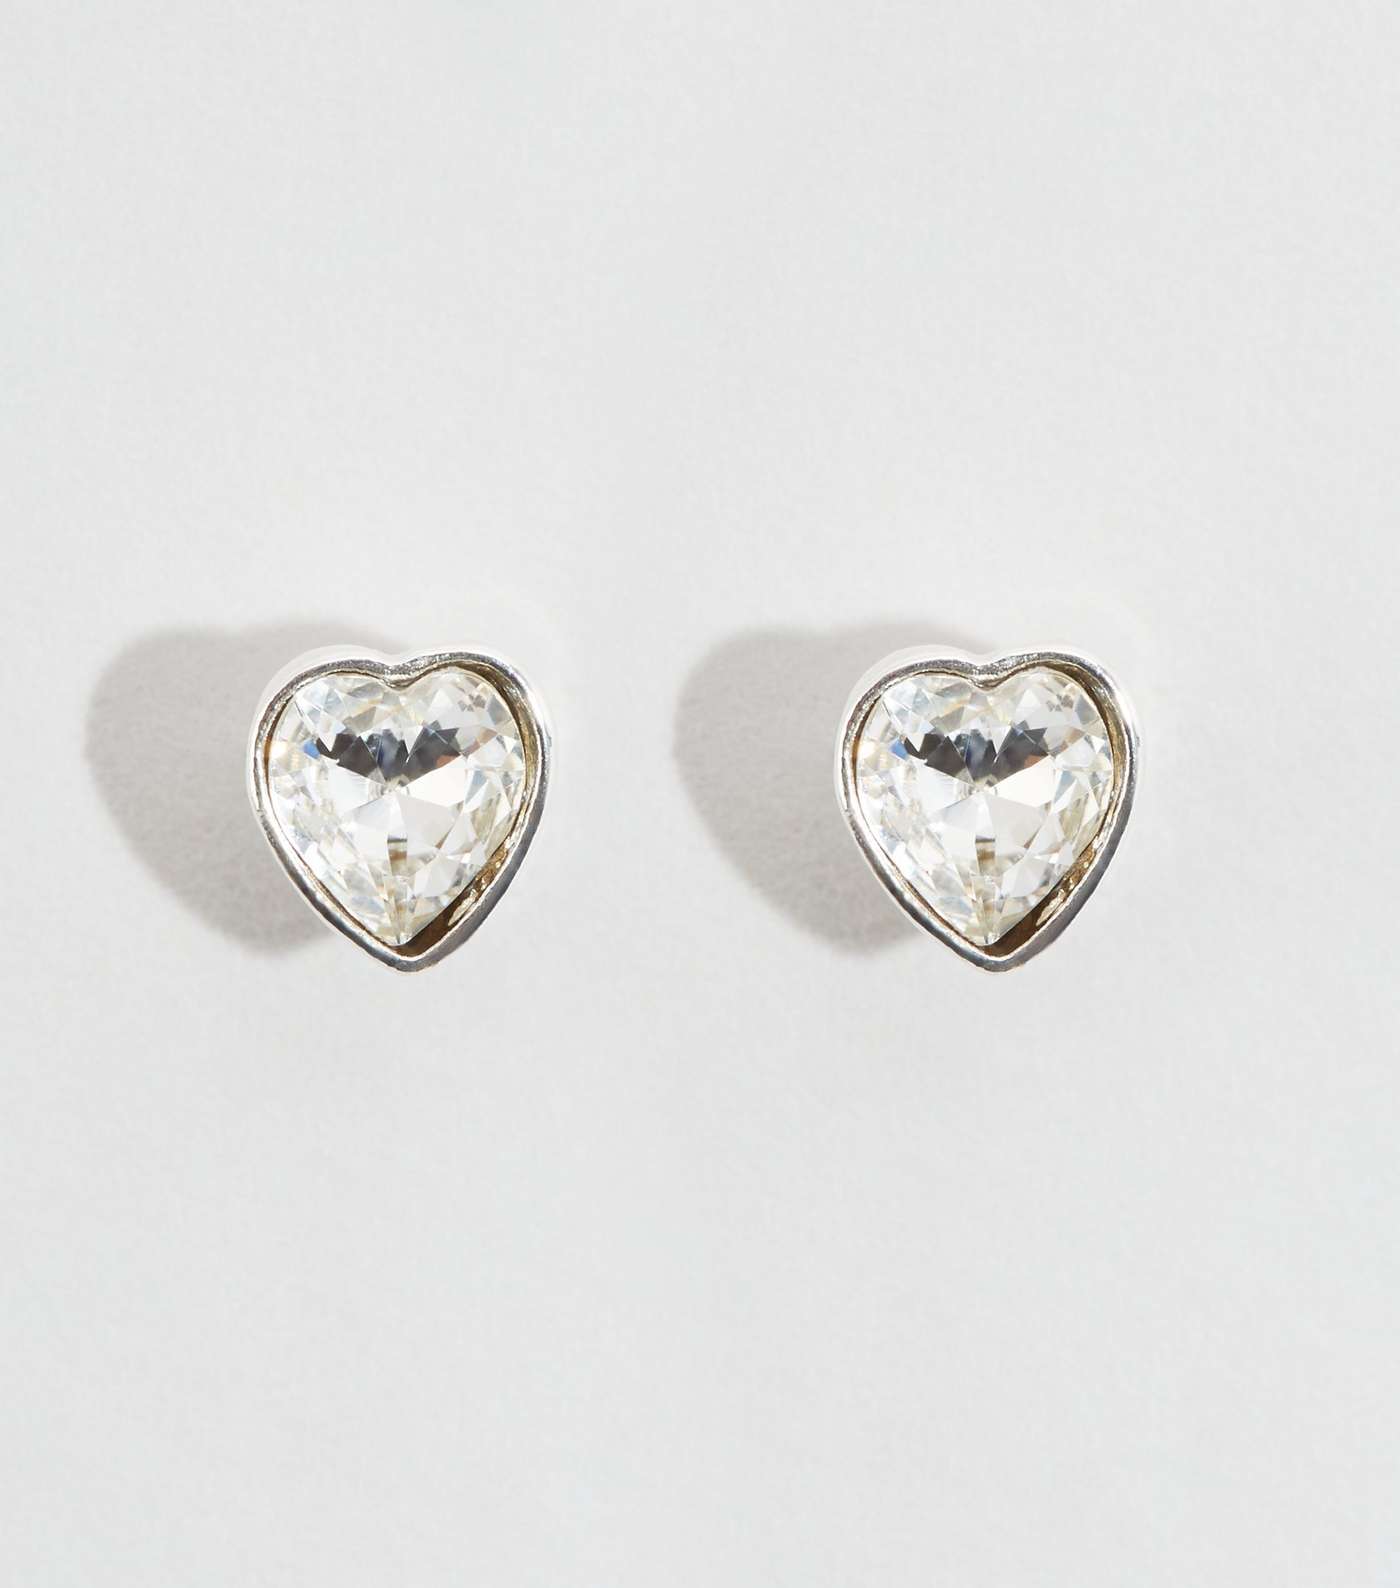 Silver Plated Heart Earrings with Crystals from Swarovski®